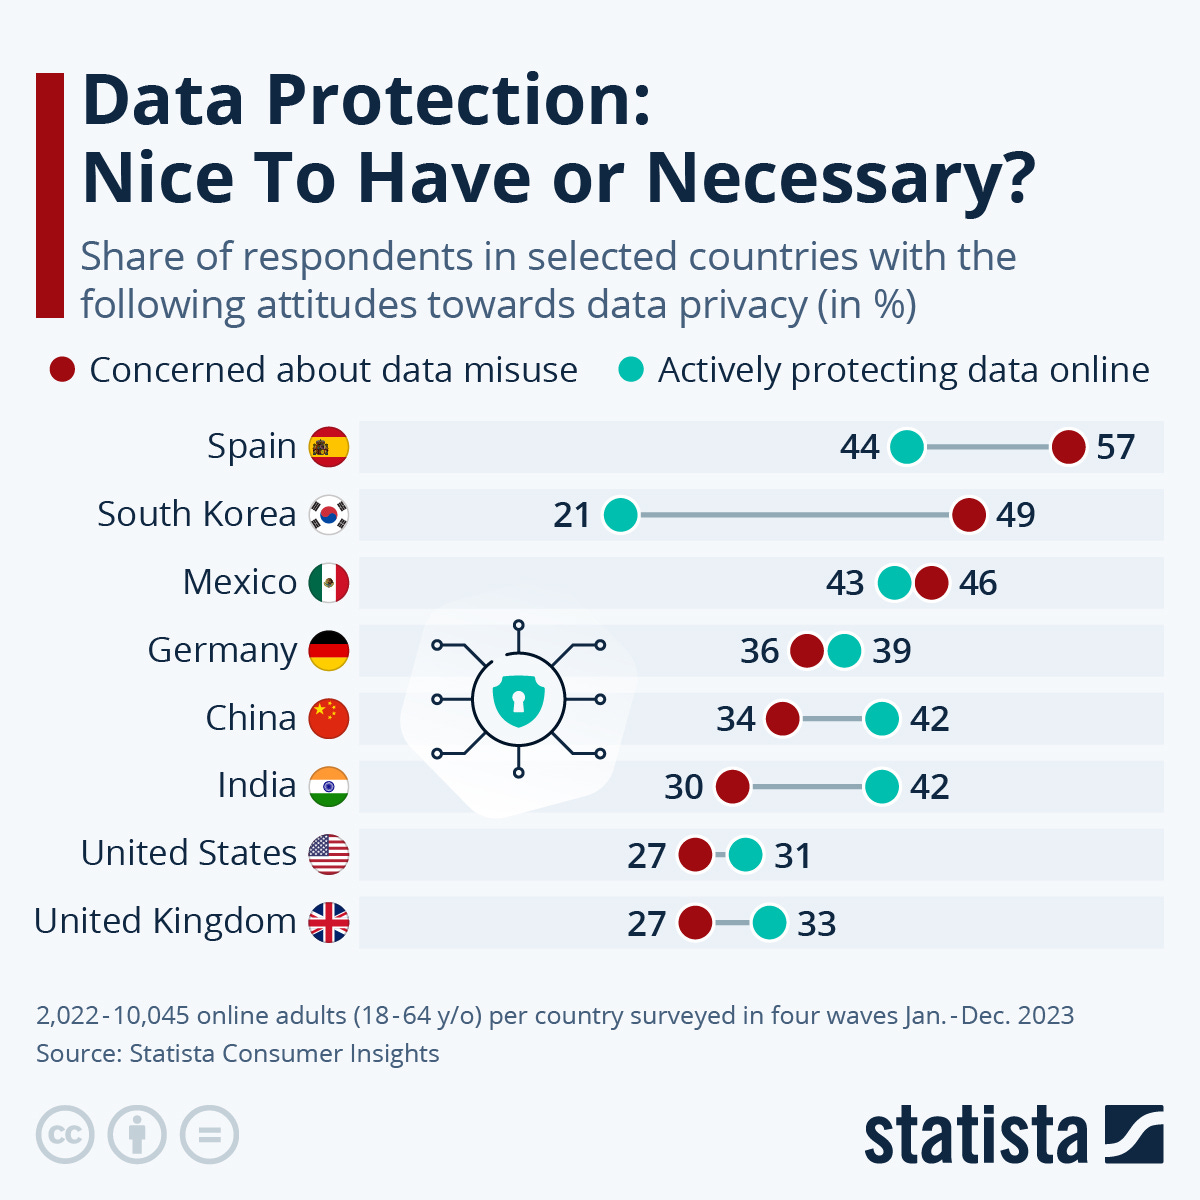 Share of respondents in selected countries with the following attitudes towards data privacy: Concerned about data misuse vs Actively protecting data online. Spain 57 per cent vs 44 per cent, South Korea 49 per cent vs 21 per cent, Mexico 46 per cent vs 43 per cent, Germany 36 per cent vs 39 per cent, China 34 per cent vs 42 per cent, India 30 per cent vs 42 per cent, the U. S. 27 per cent vs 31 per cent, and the U.K. 27 per cent vs 33 per cent. Data collected from 2,022 to 10,045 online adults (18 to 64 years old) per country surveyed in four waves between January and December 2023 for Statista Consumer Insights.